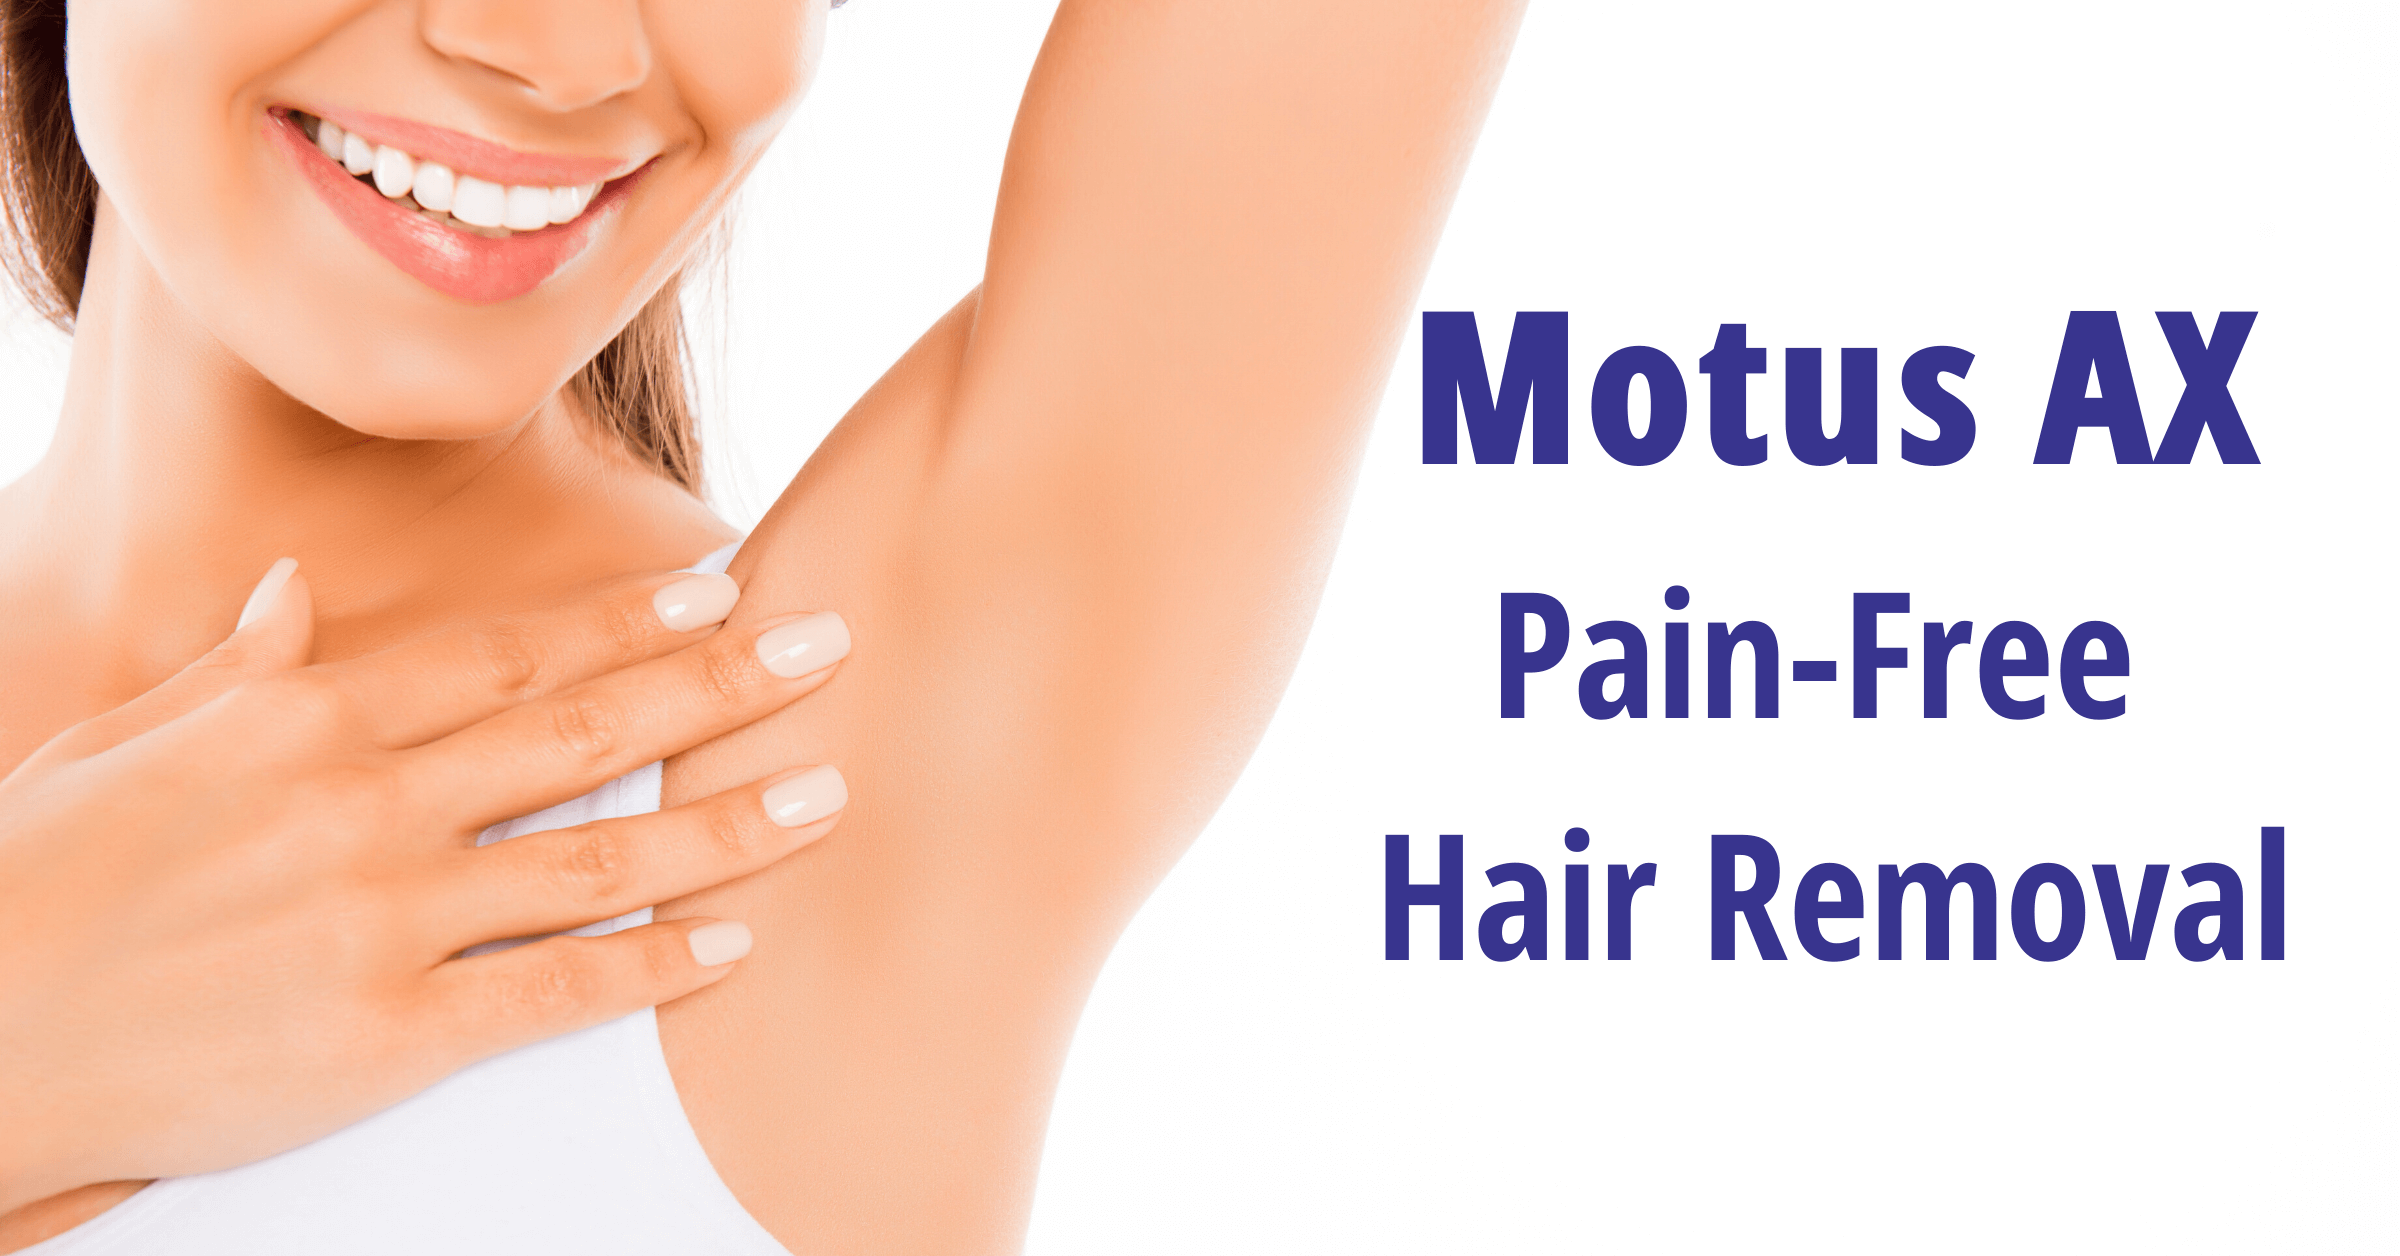 Experience Motus AX for laser hair removal - image showing lady with smooth underarm